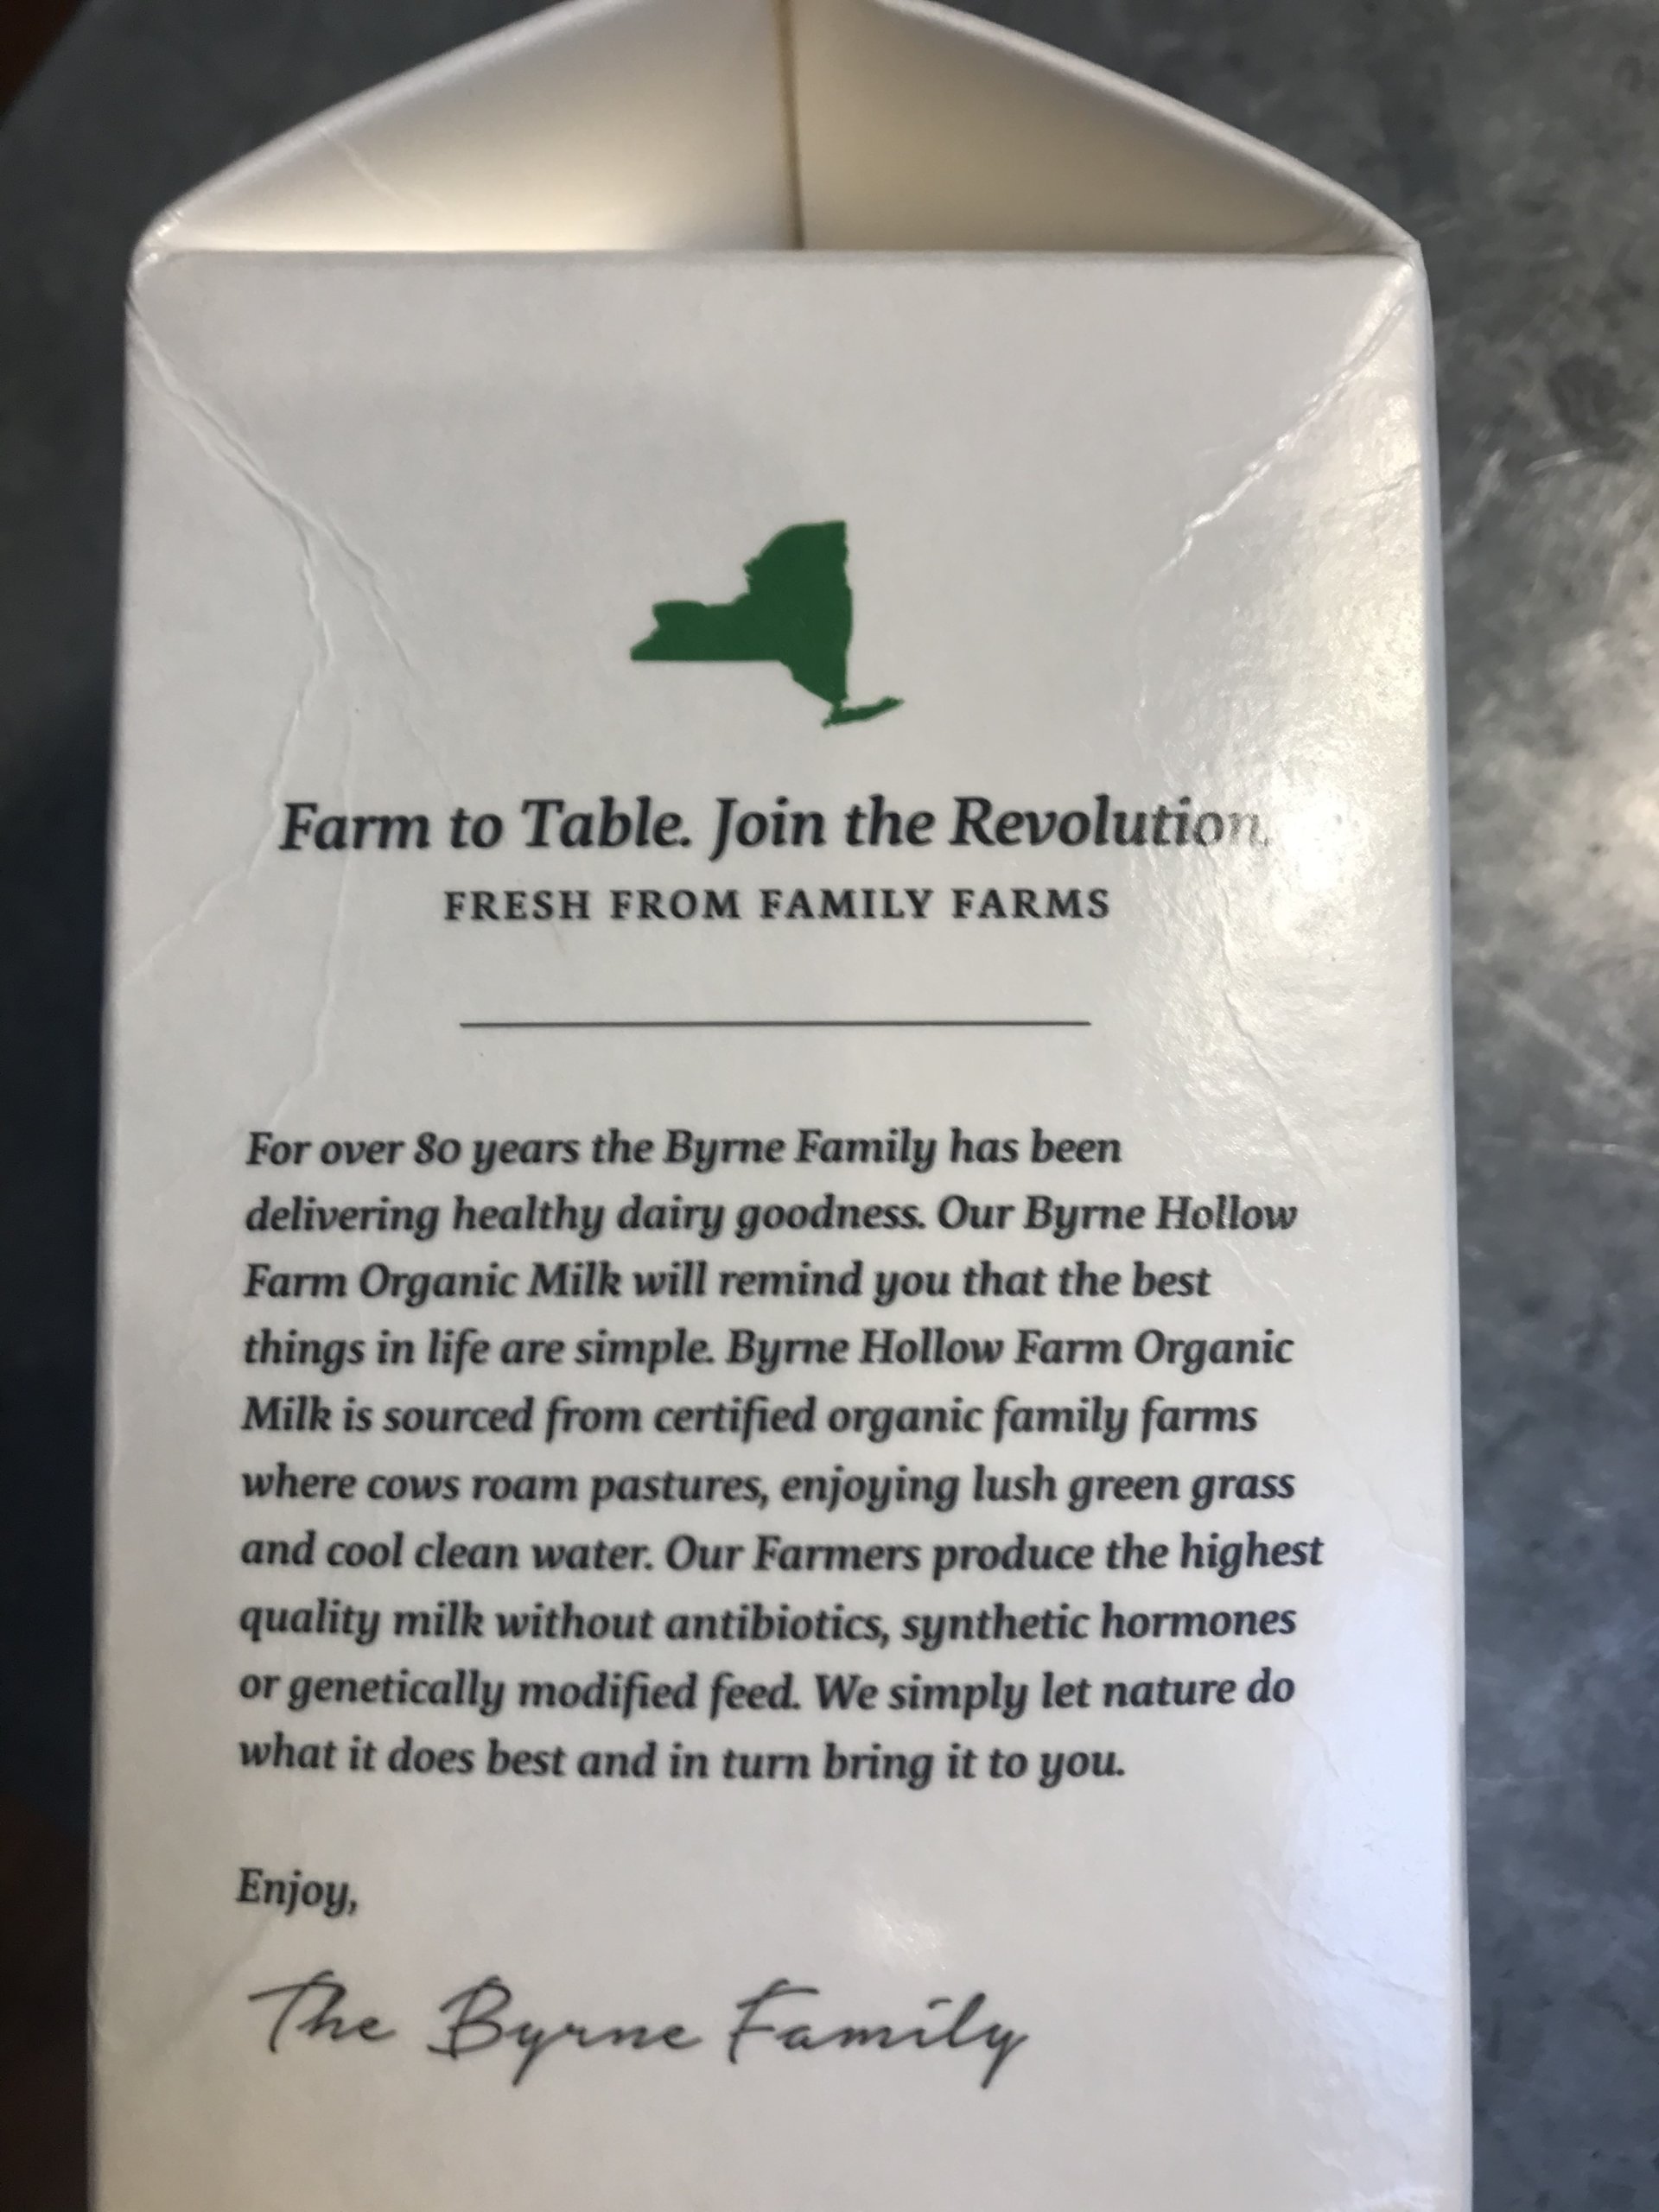 The image of New York State even appears on milk cartons.